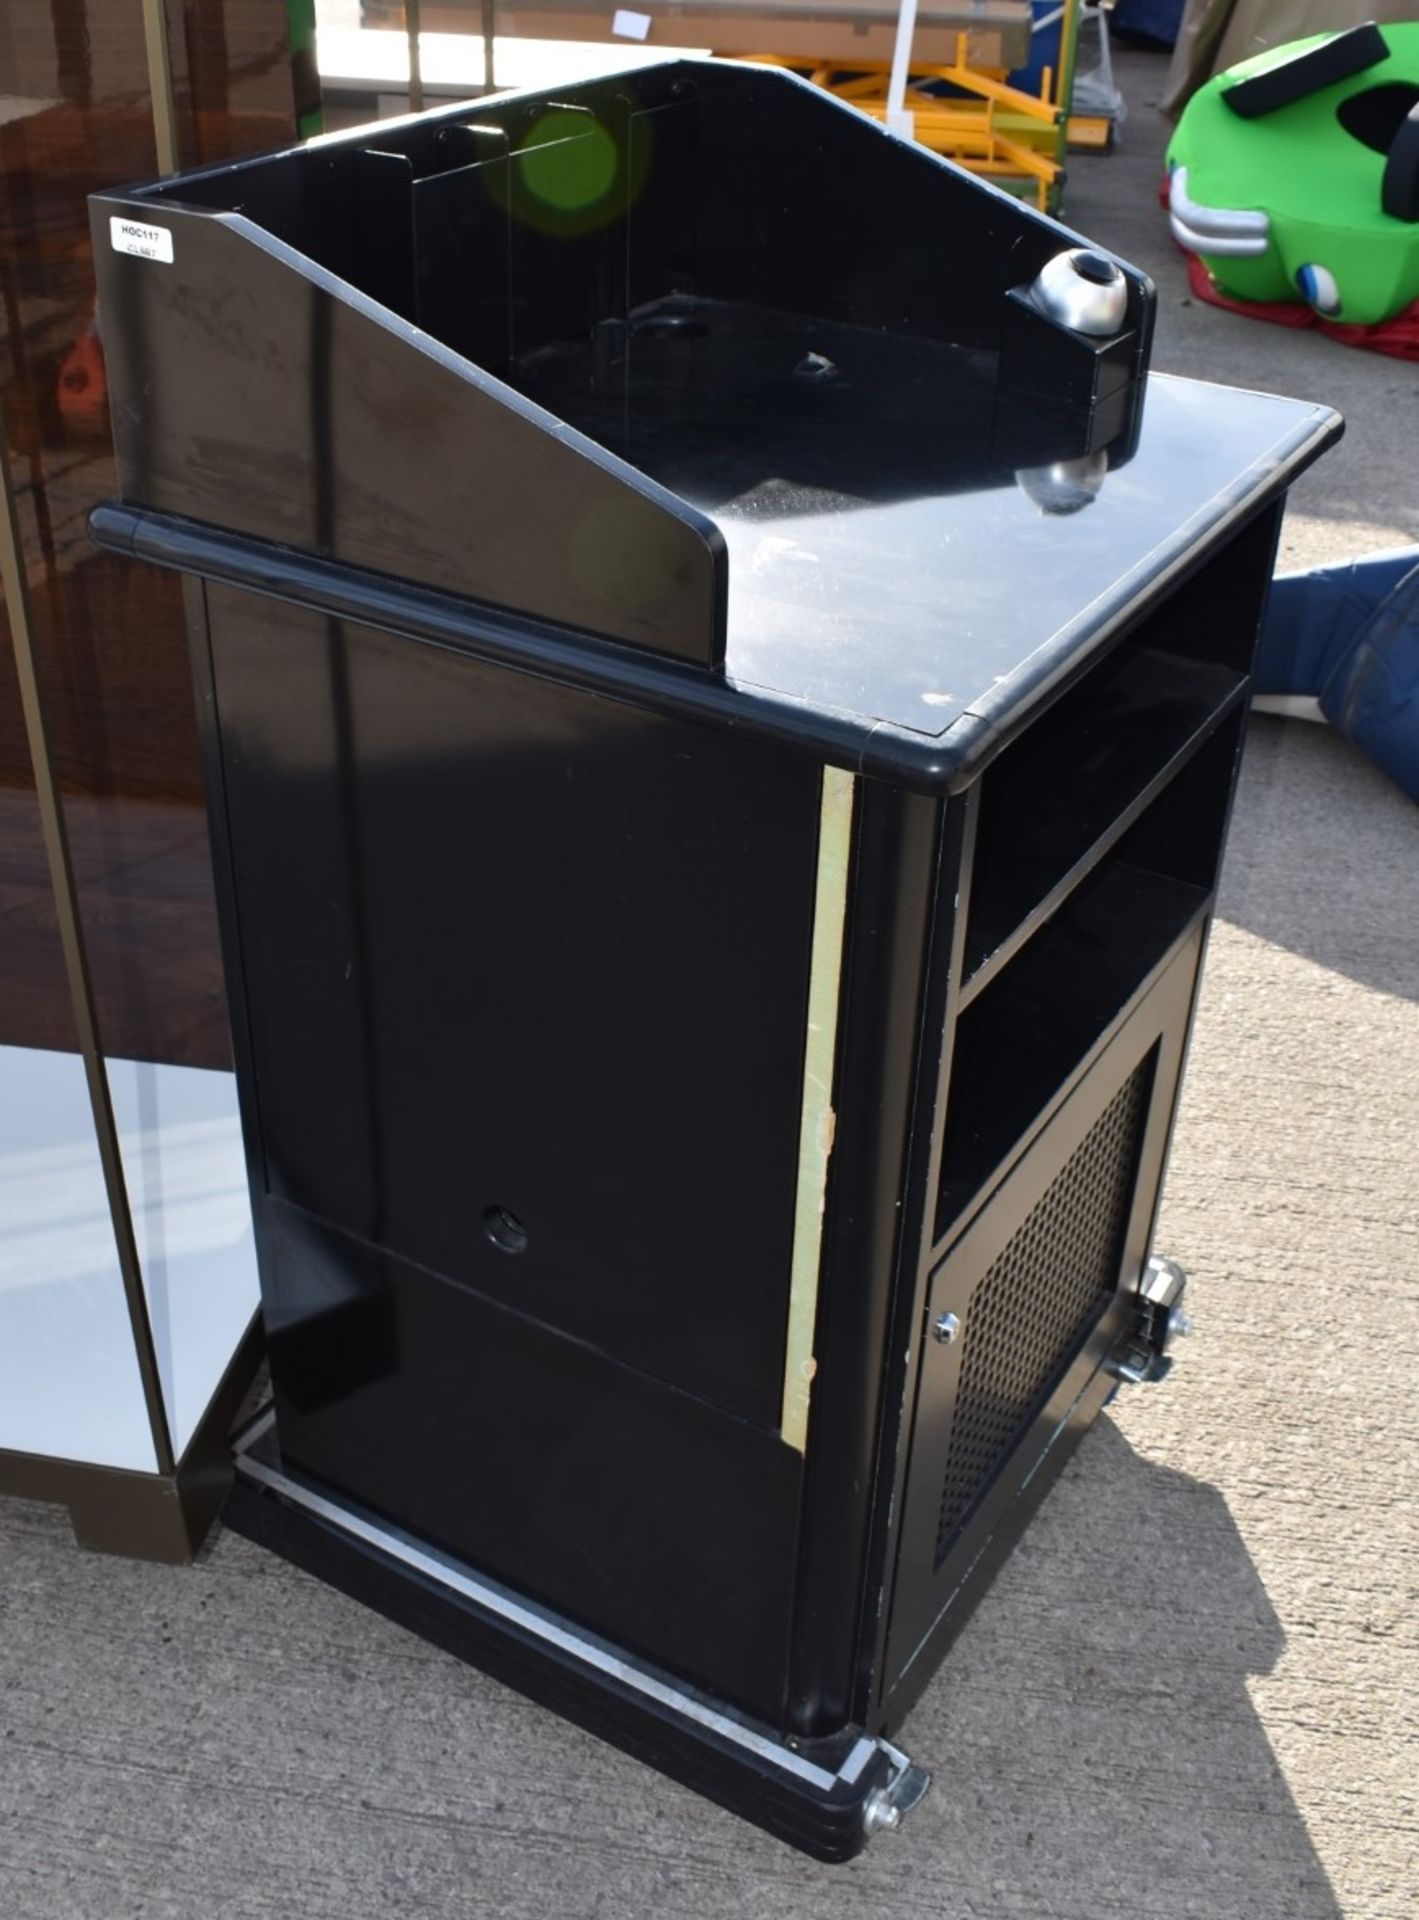 1 x Portable Mobile Sale Till Store Retail Counter Unit In Black, With Fold-out Sides - Image 2 of 4